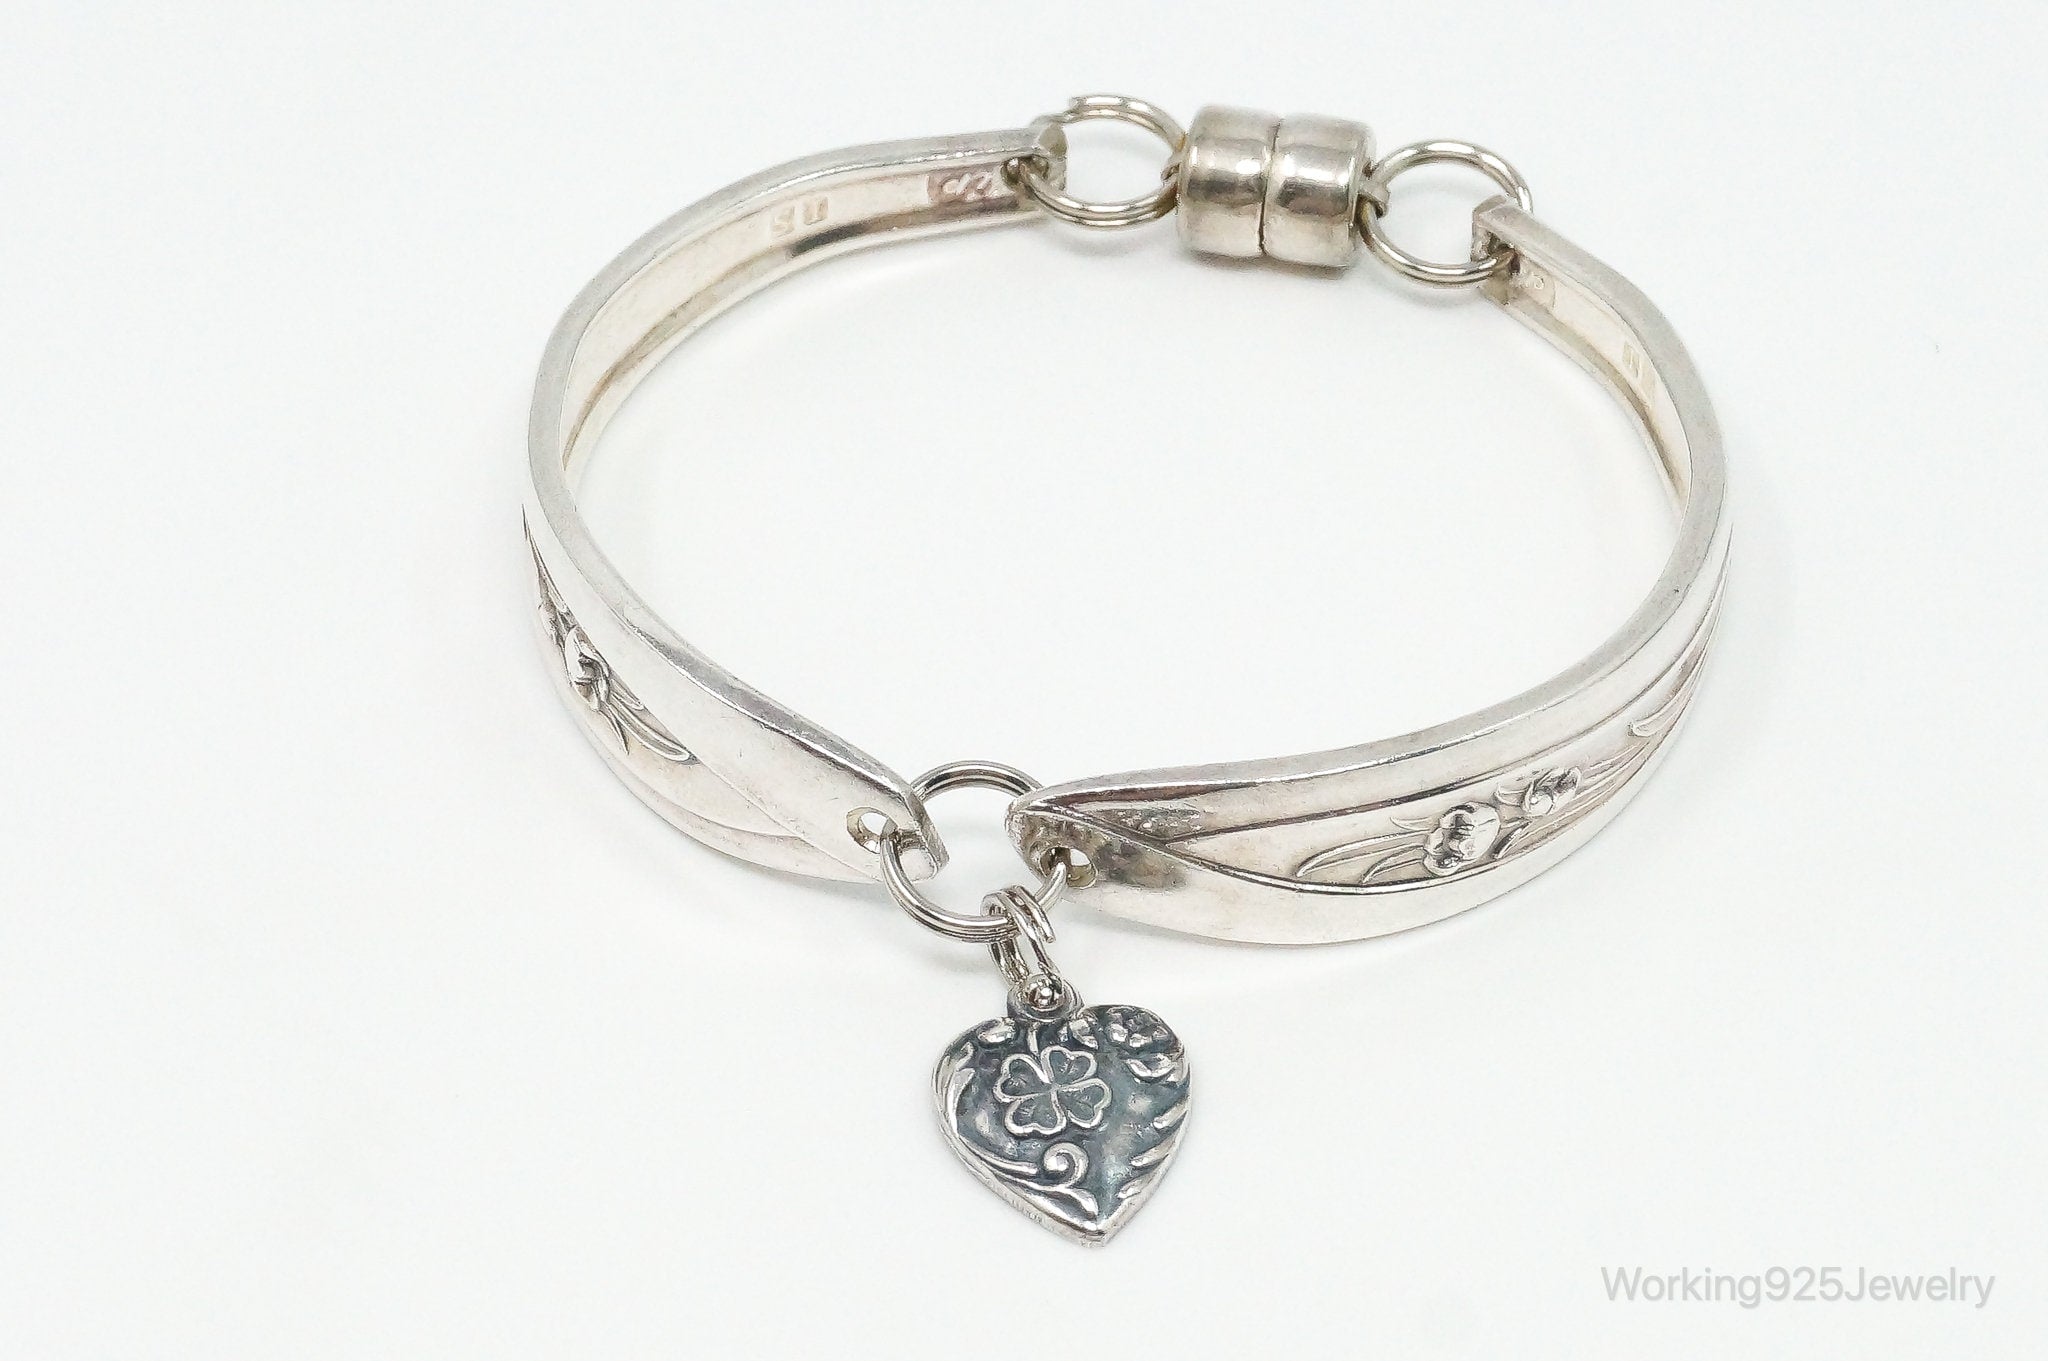 Antique Puffy Heart Charm Spoon Sterling Silver Magnetic Bracelet